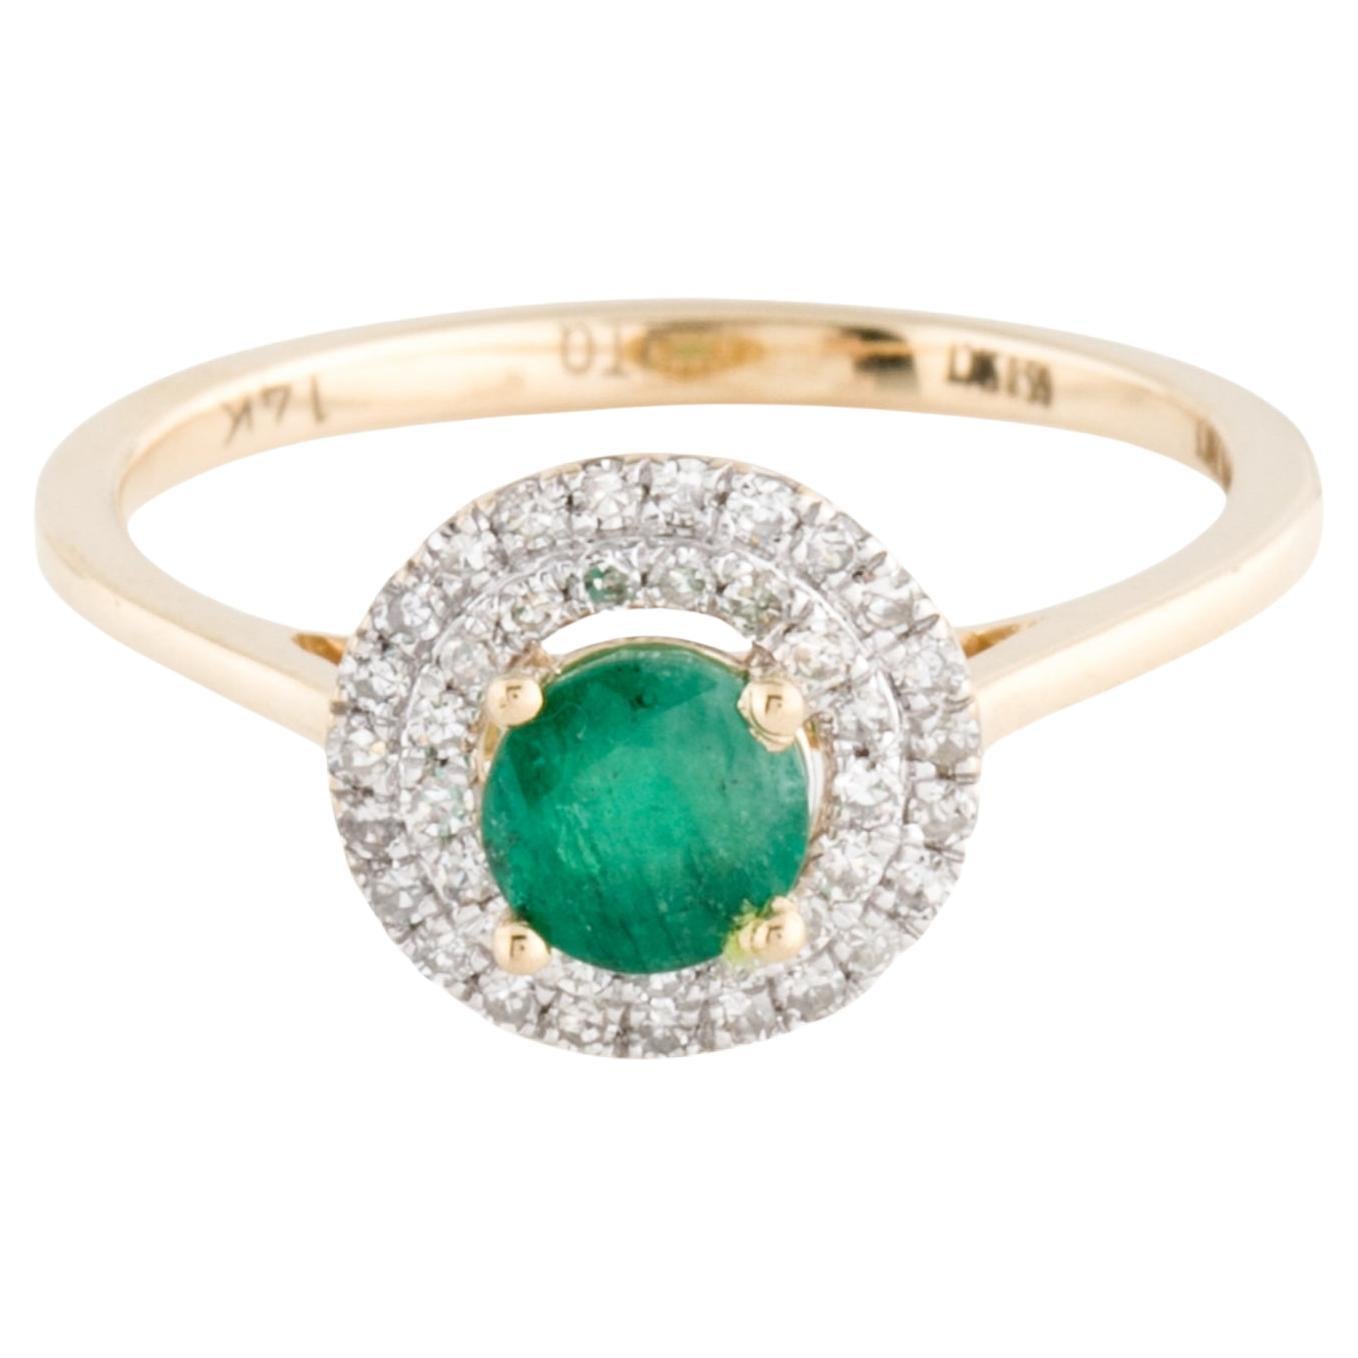 Luxurious 14K Emerald & Diamond Cocktail Ring - Size 6.25  Elegant Vintage Ring For Sale